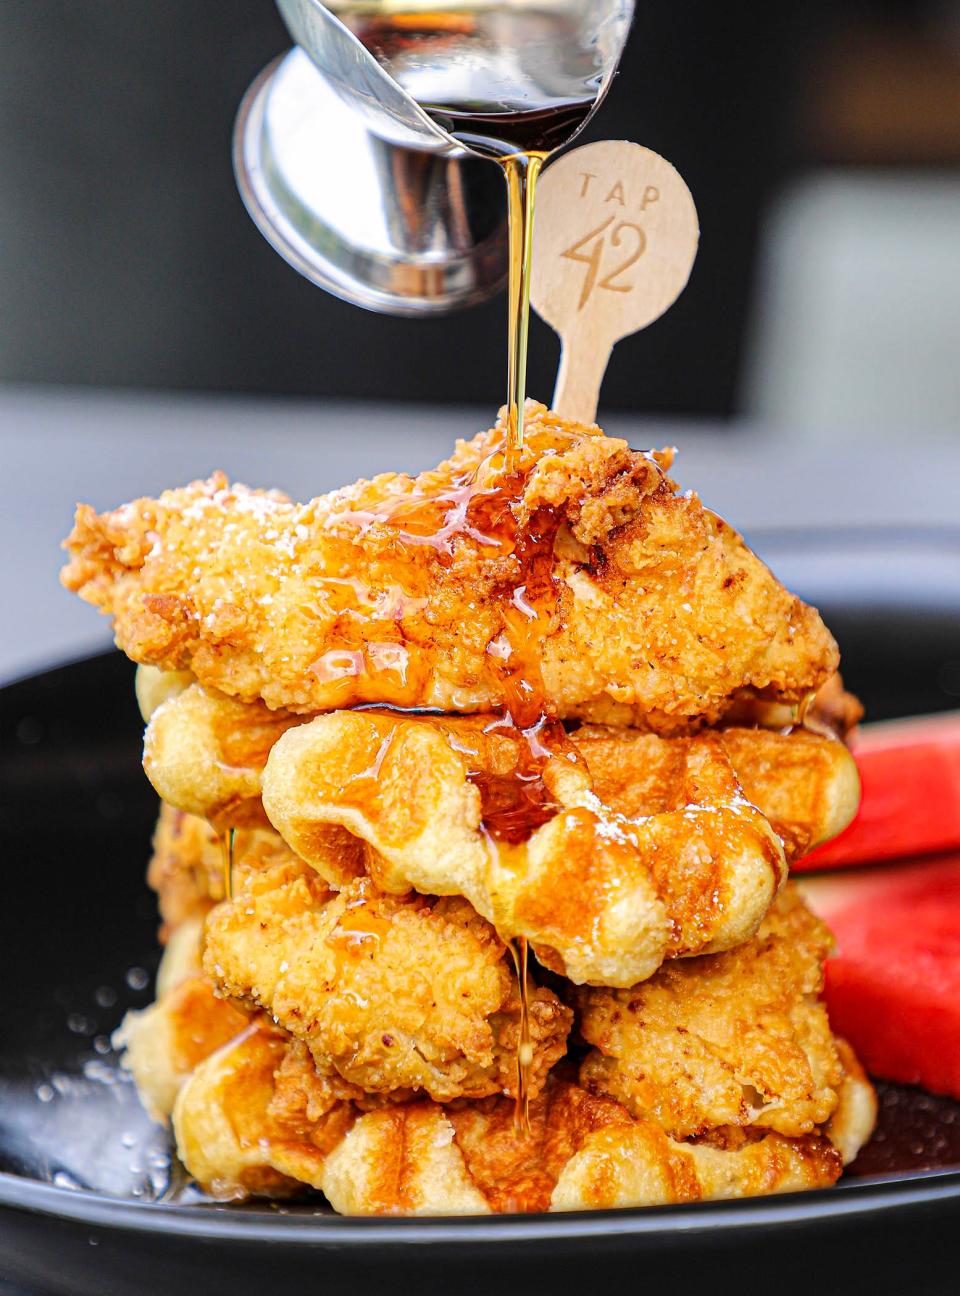 Chicken and waffles are a featured item at Tap 42, a restaurant that will open during 2023 at The Gardens Mall in Palm Beach Gardens.